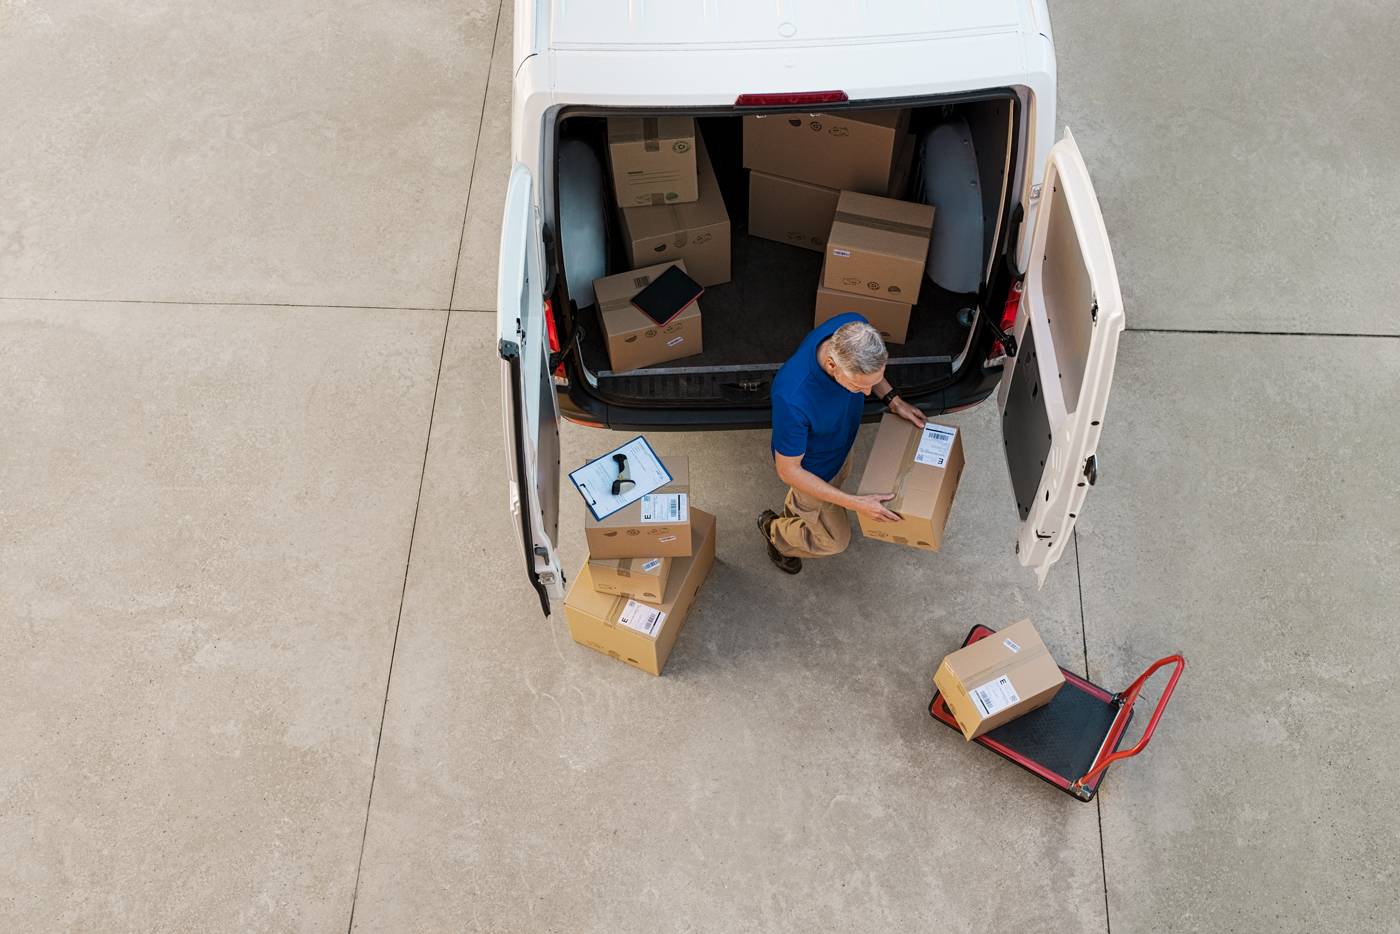 A delivery man unloading packages from his van